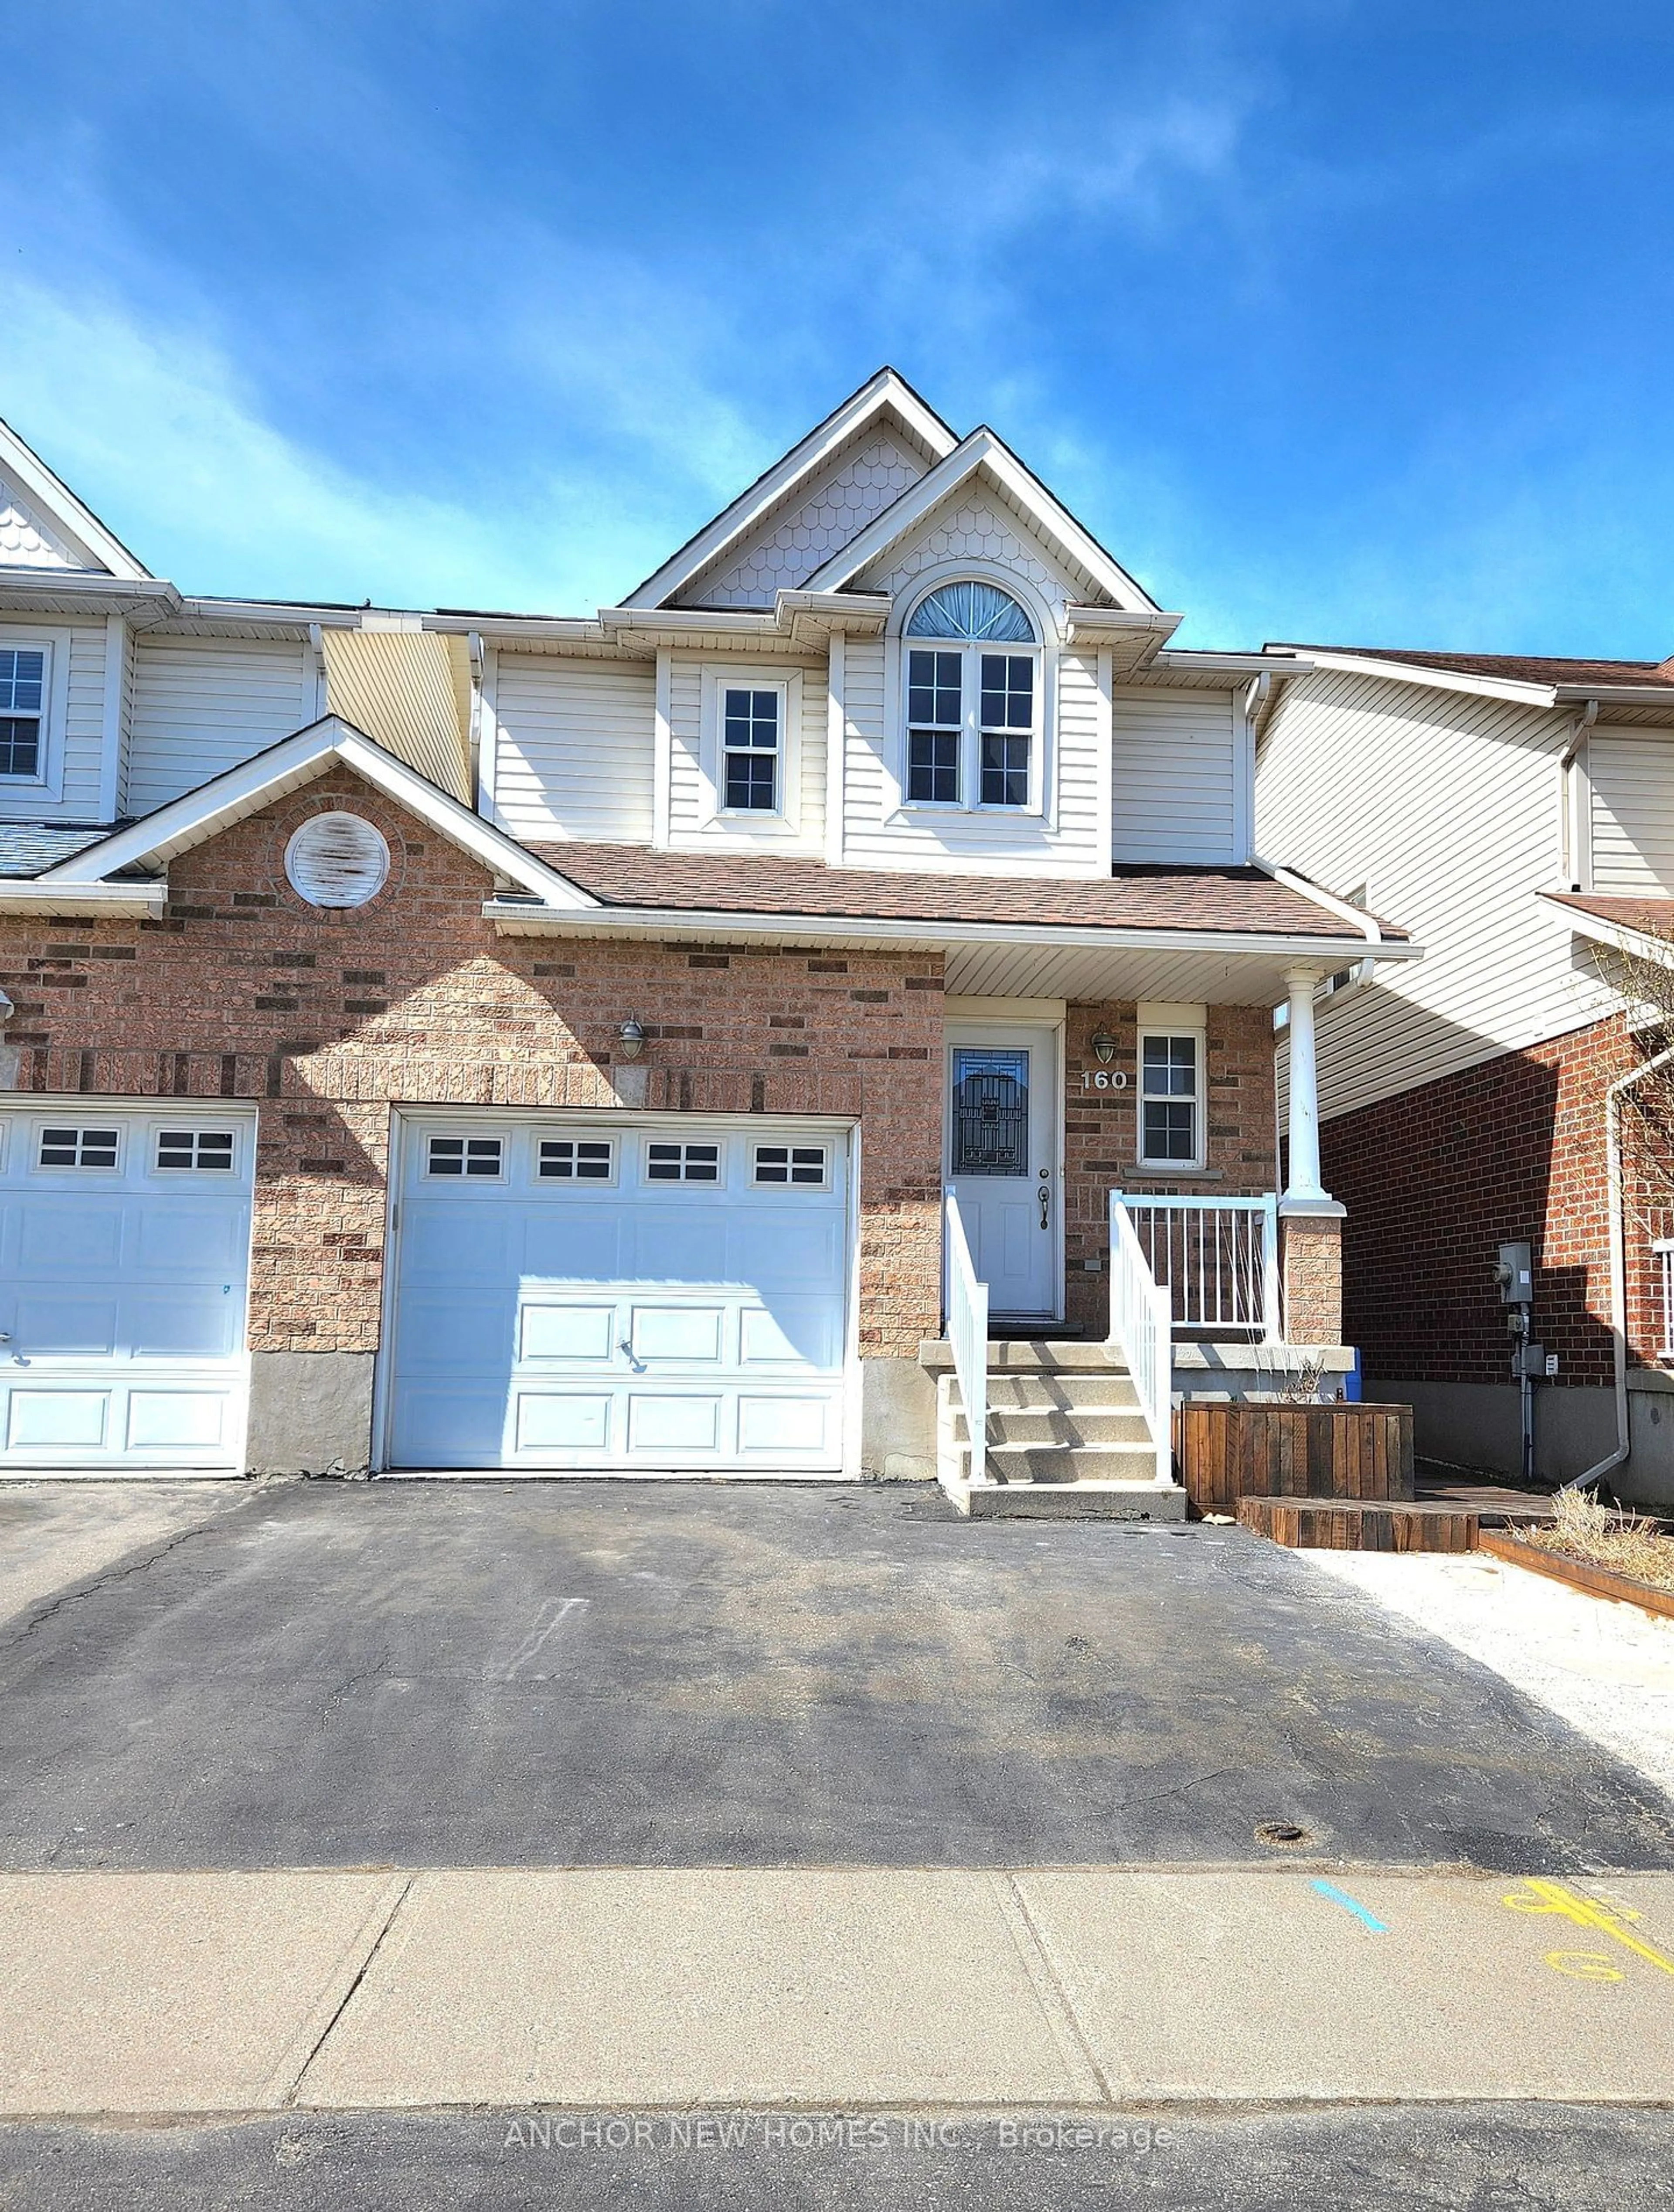 Home with brick exterior material for 160 Periwinkle St, Kitchener Ontario N2E 4C6